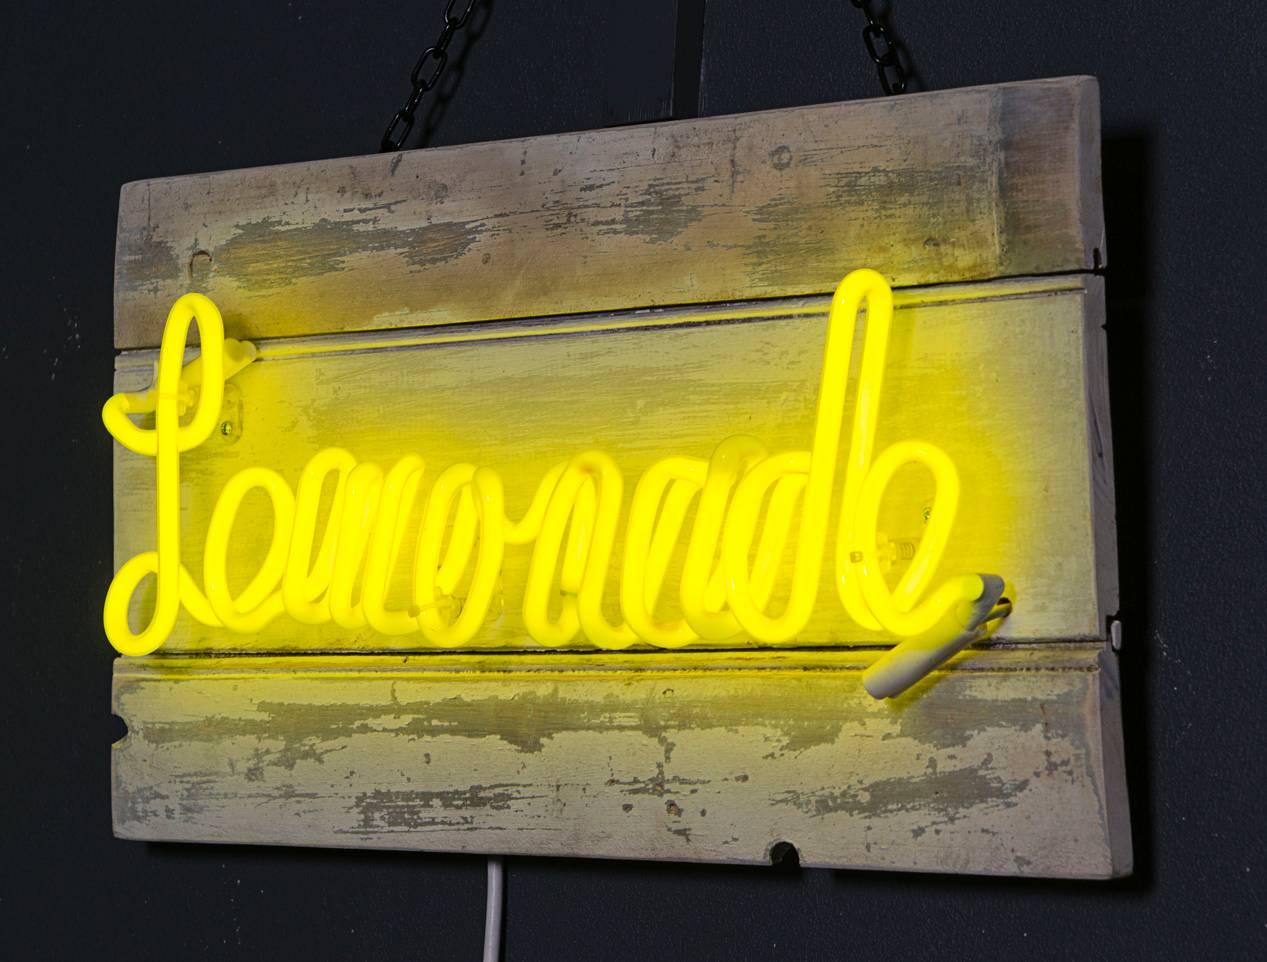 God's Own Junkyard designed Neon Artwork.   

"Lemonade" Canary Yellow Neon on Aged Painted Wood.

Lights of Soho present... God's Own Junkyard. New & used neon fantasies, salvaged signs, vintage neons, old movie props and retro